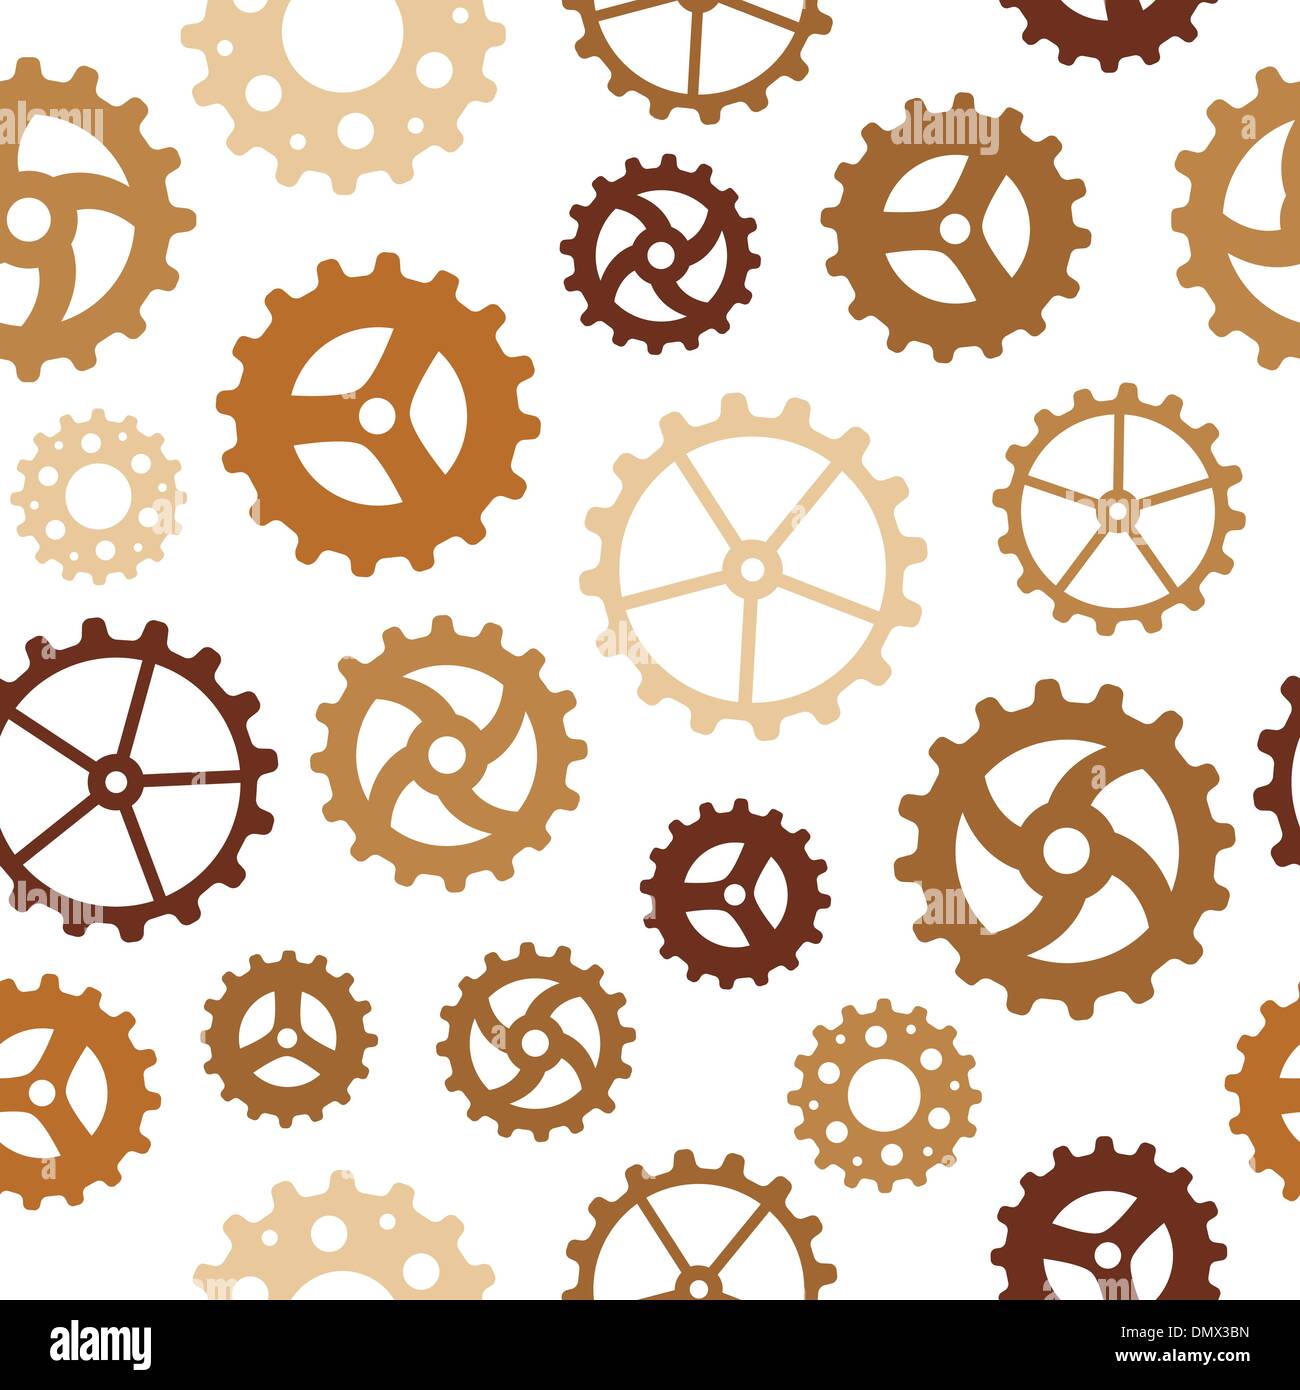 Different Gearwheels Seamless Background Stock Vector